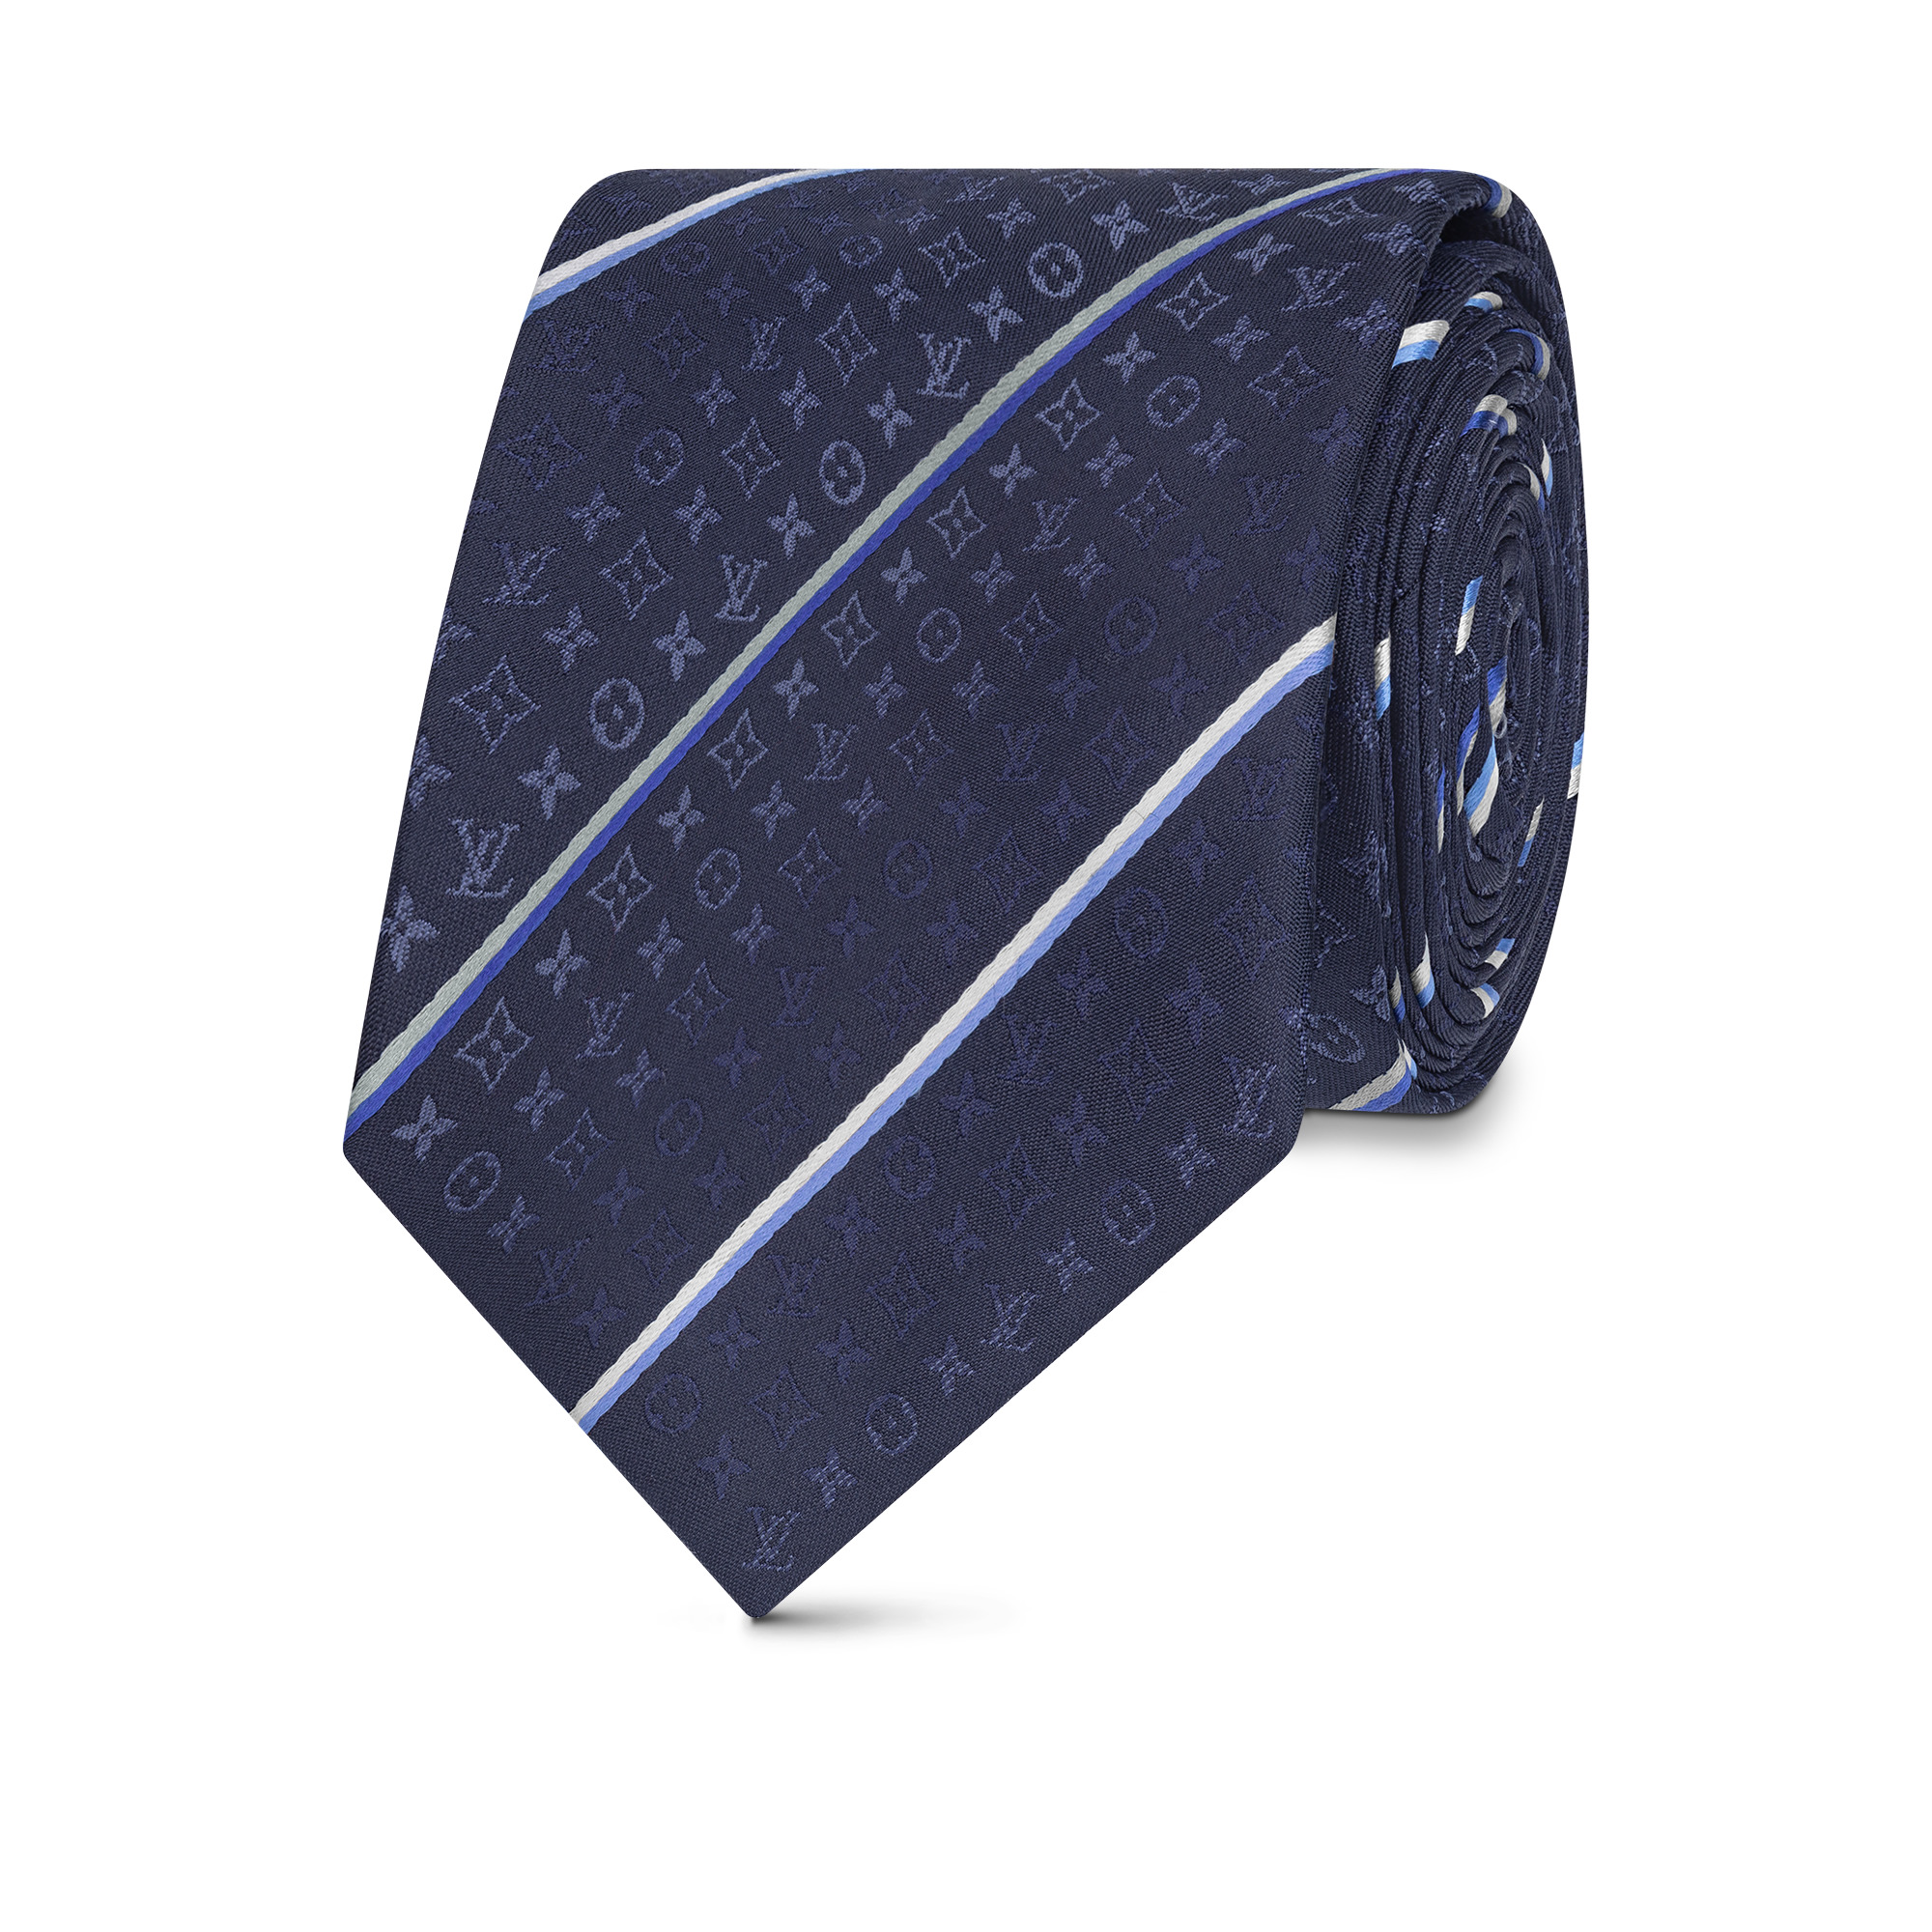 Over The Stripes Tie - 4